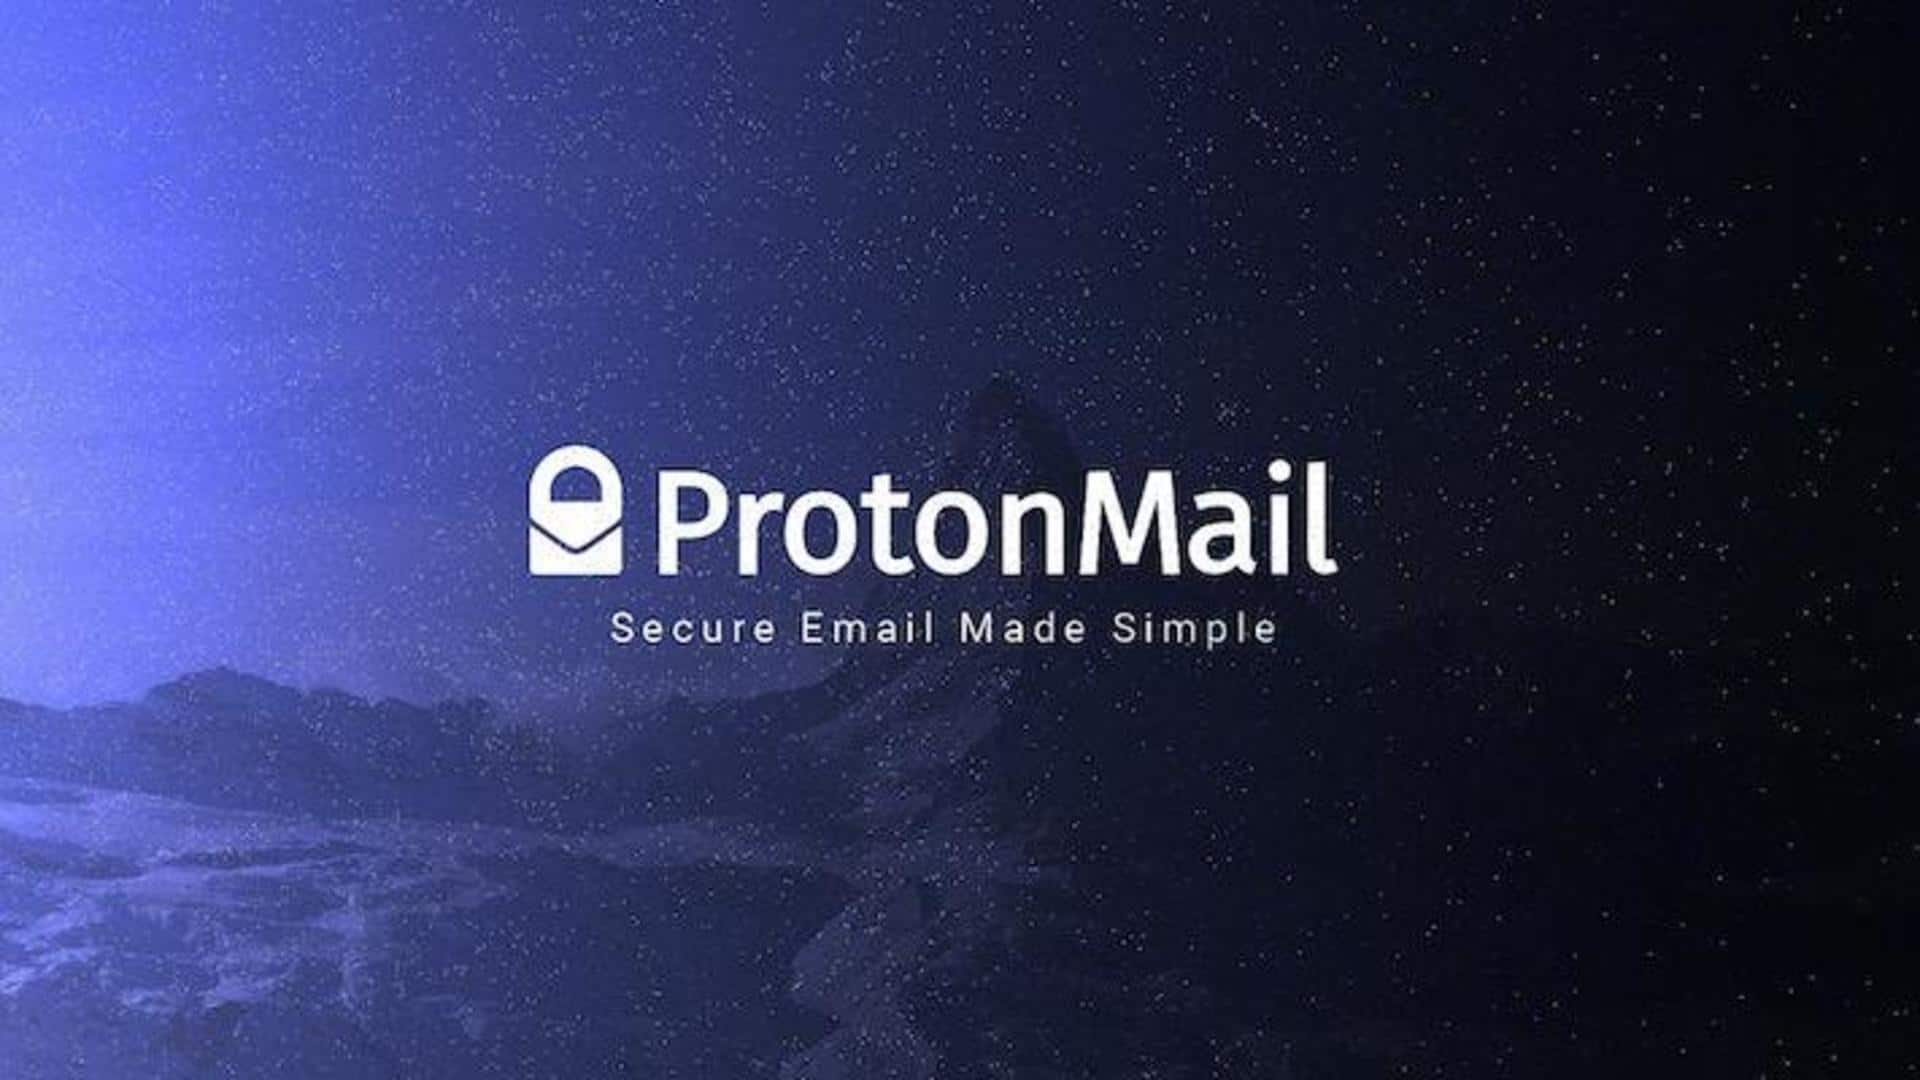 What's Proton Mail and why many prefer it over Gmail?